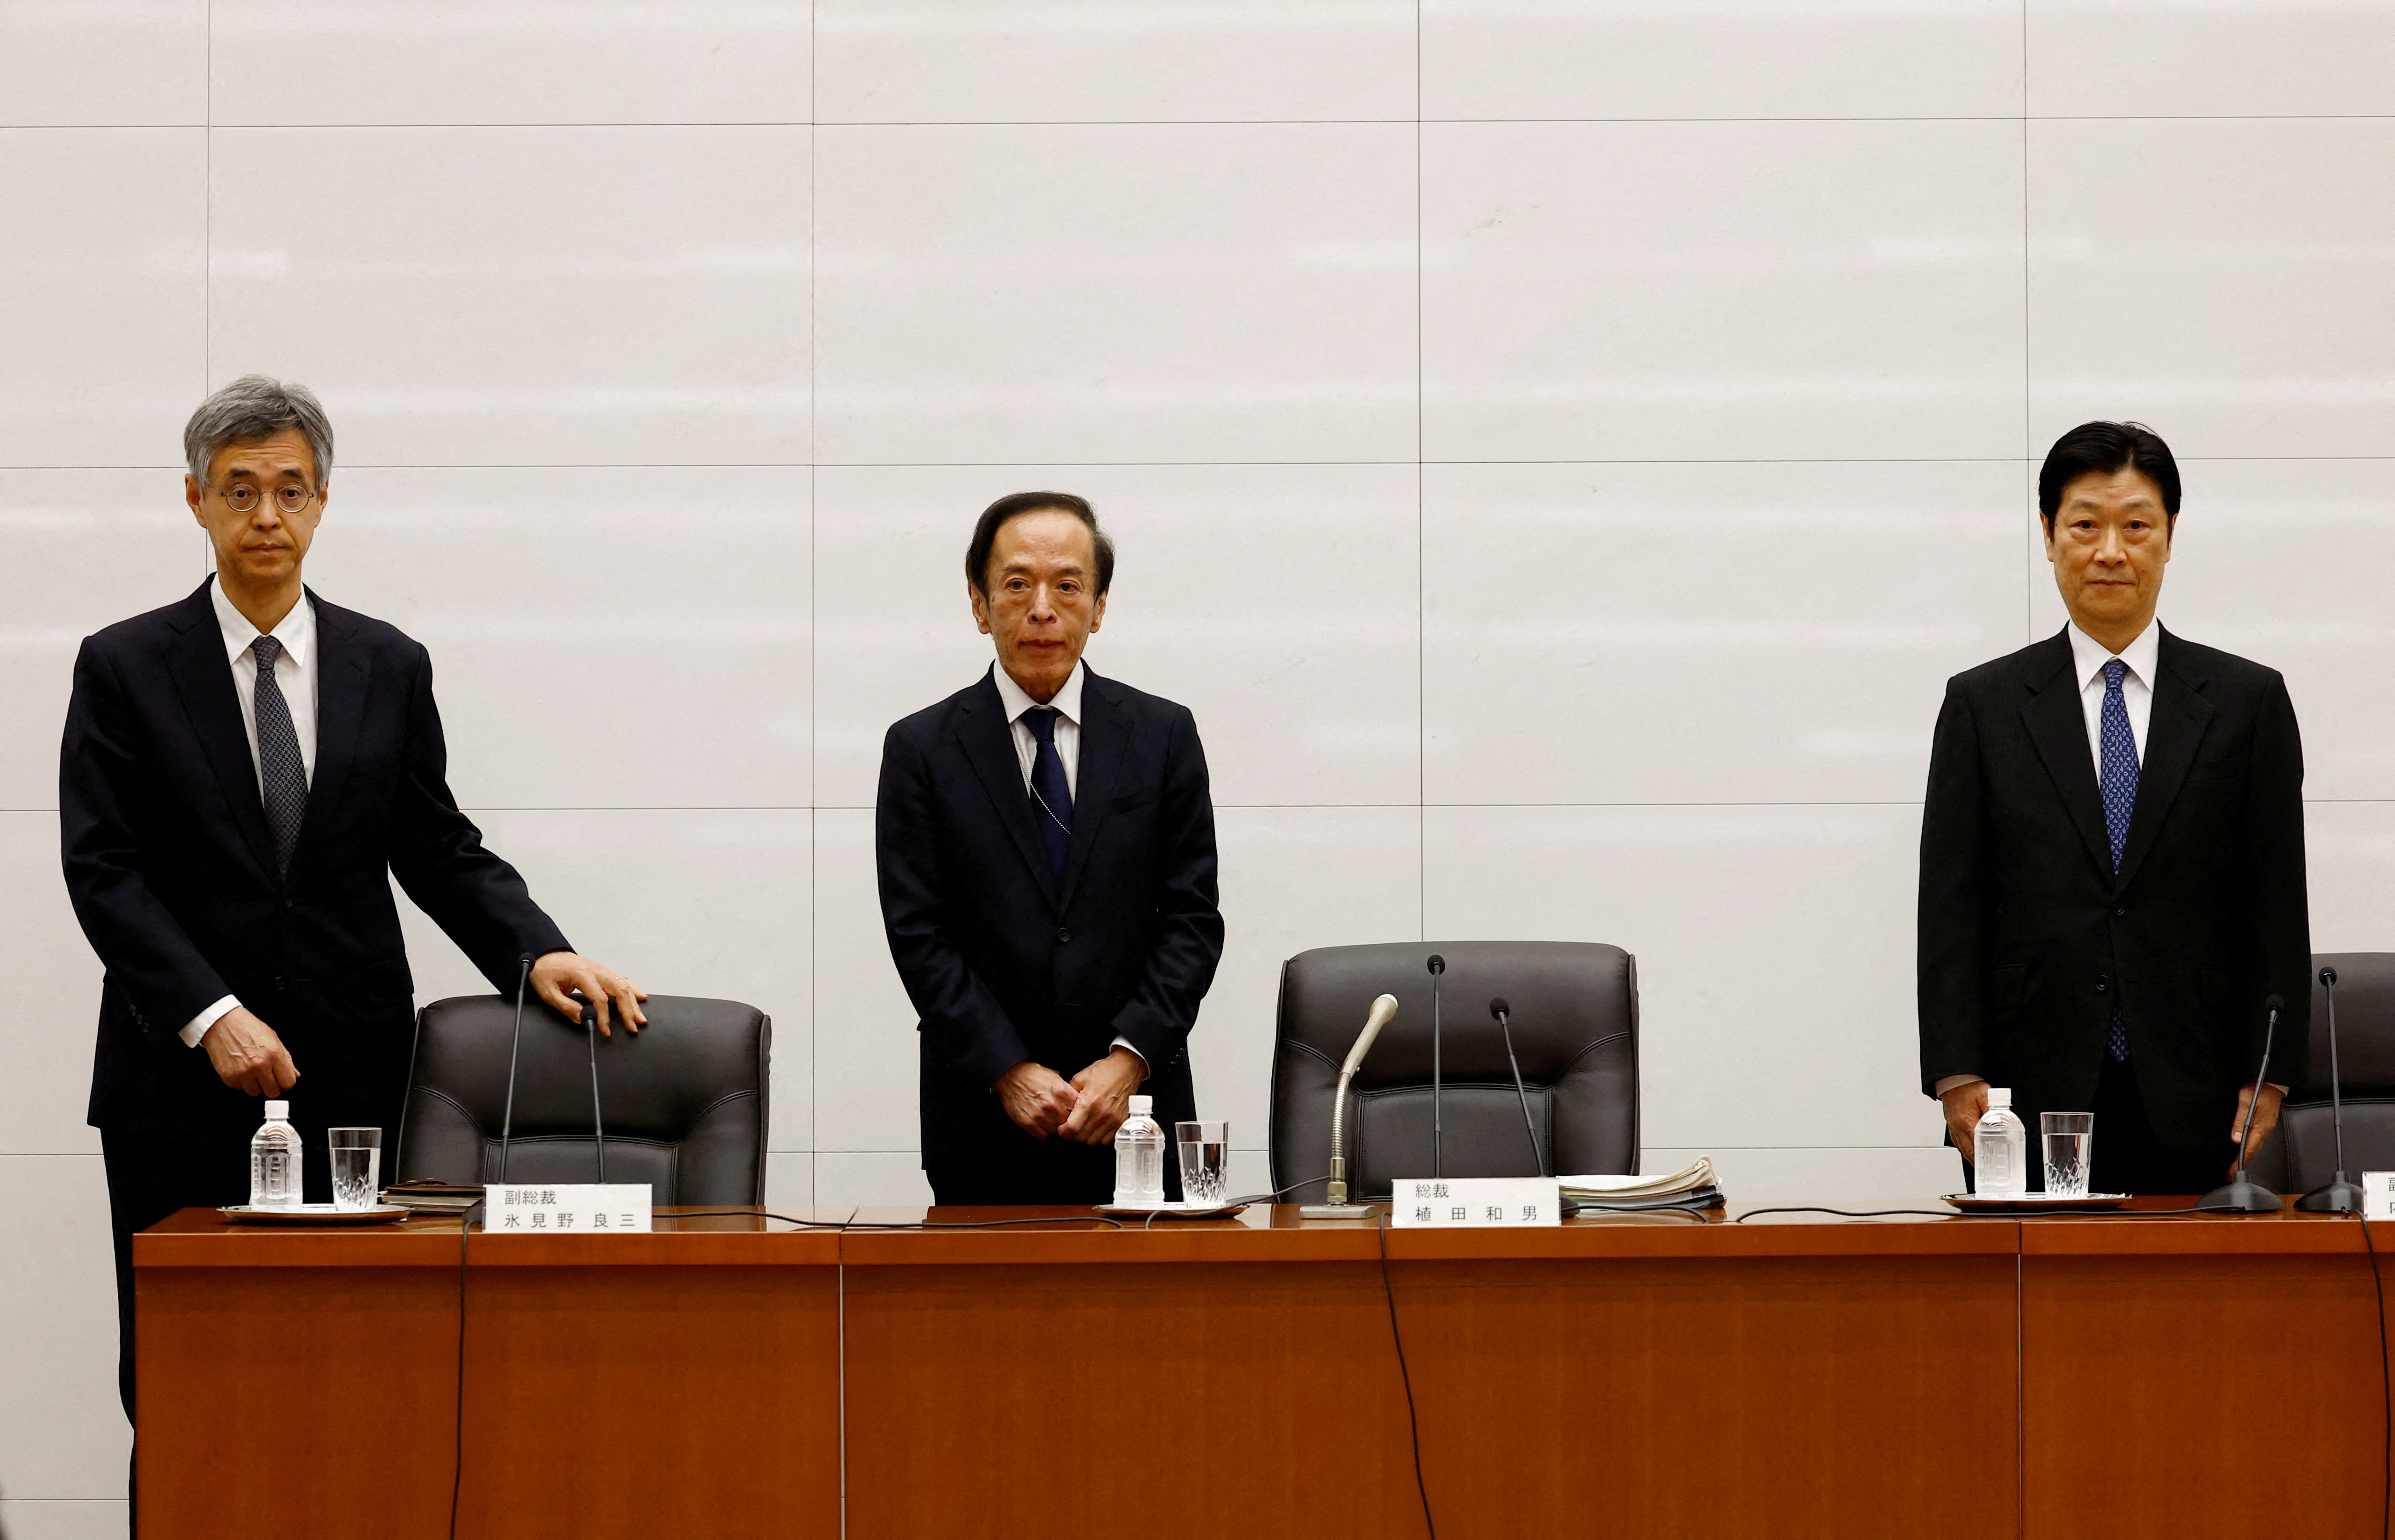 New Bank of Japan Governor Kazuo Ueda and Deputy Governors Ryozo Himino and Shinichi Uchida attend a news conference at the bank headquarters in Tokyo